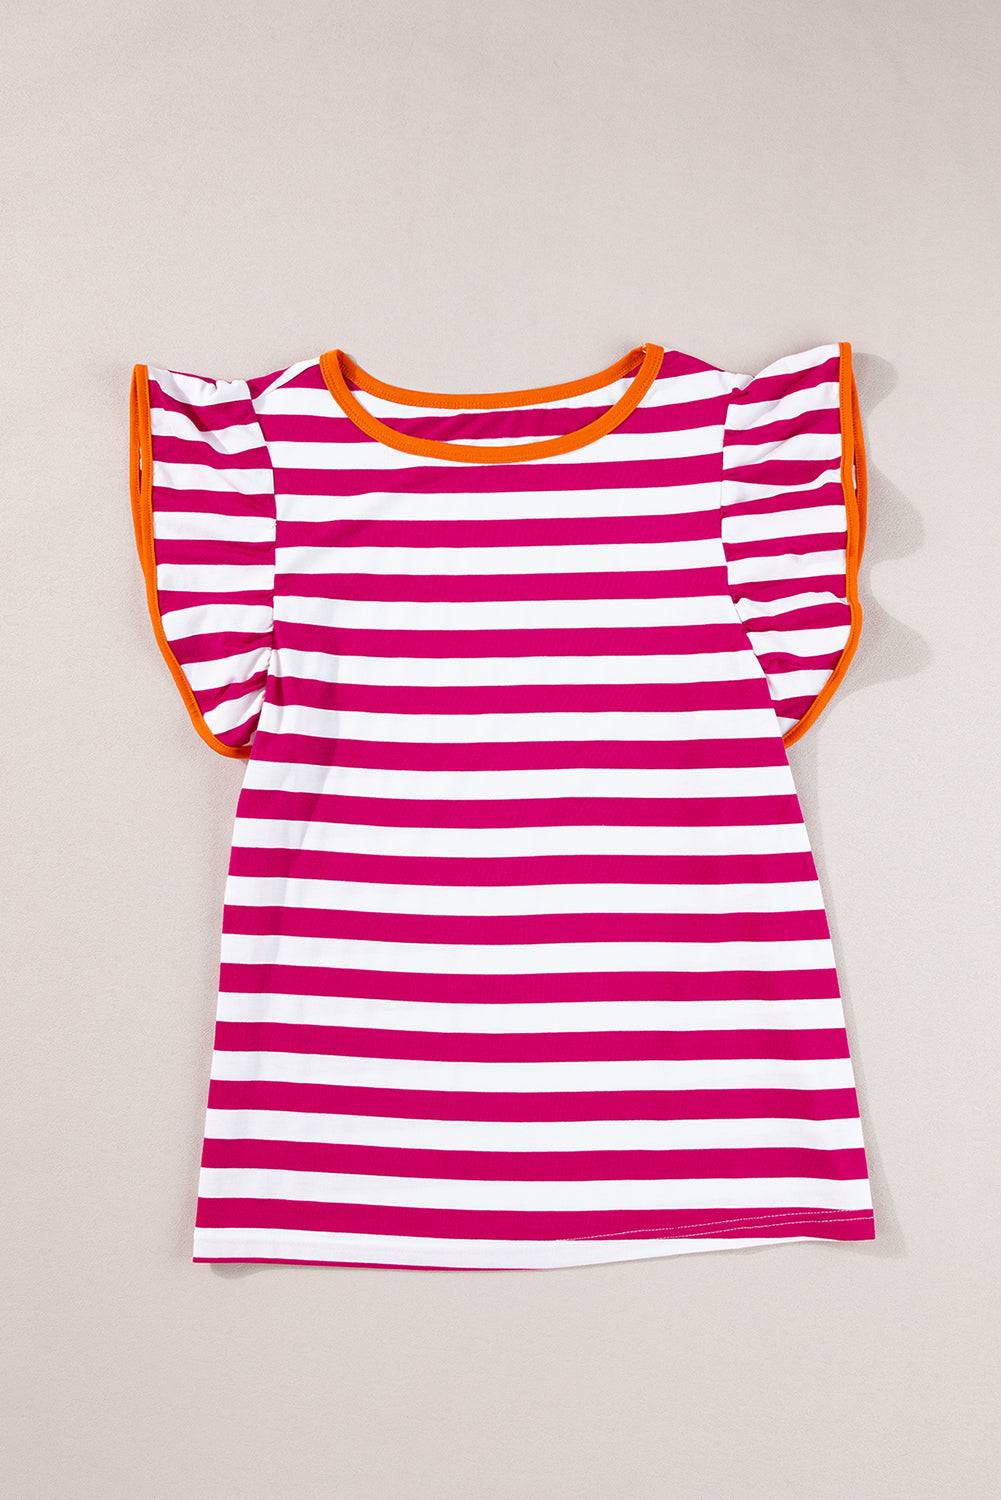 a pink and white striped shirt with orange trim